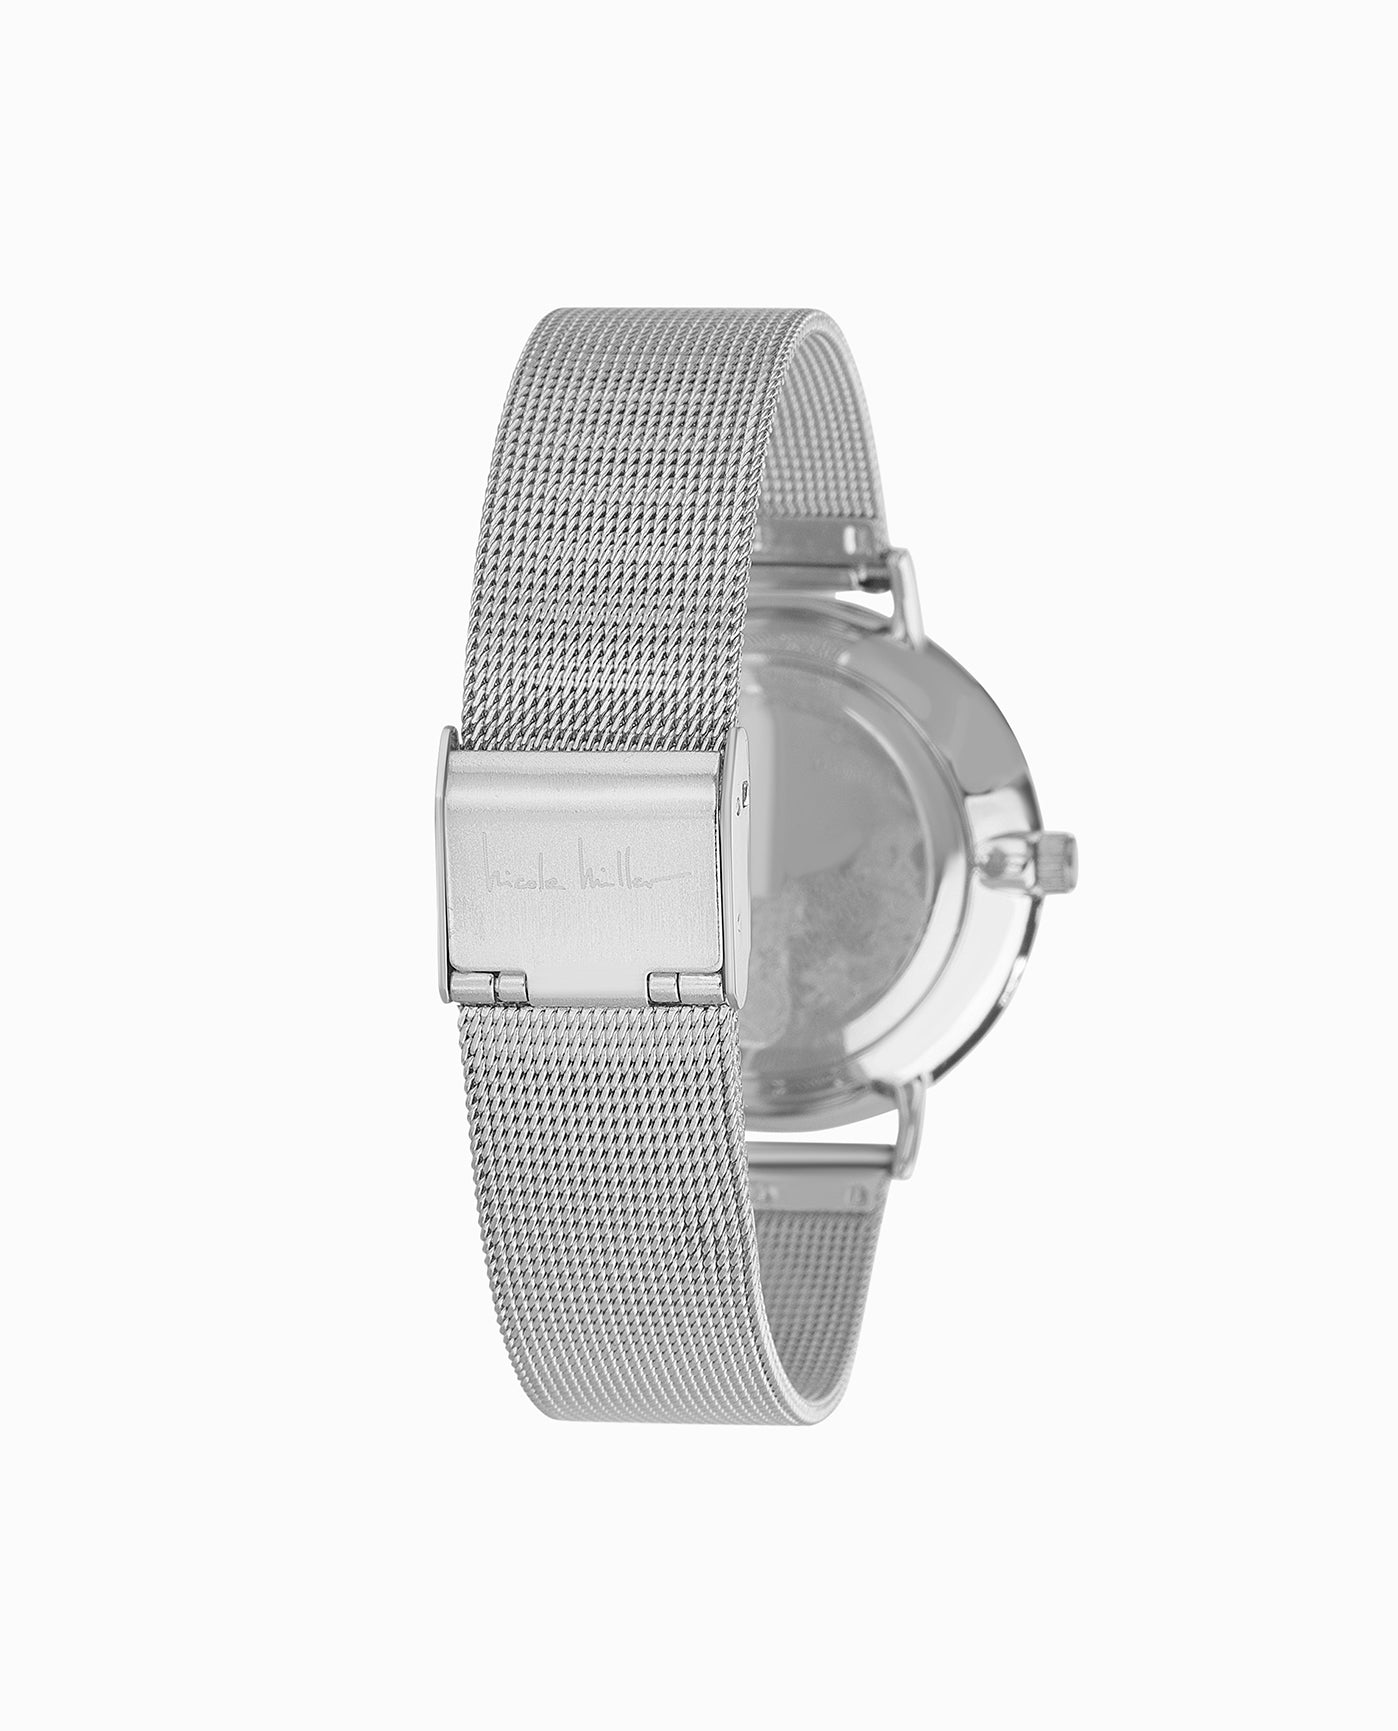 STAINLESS STEEL BRACELET WATCH, 35mm BAND CLOSE UP | Silver